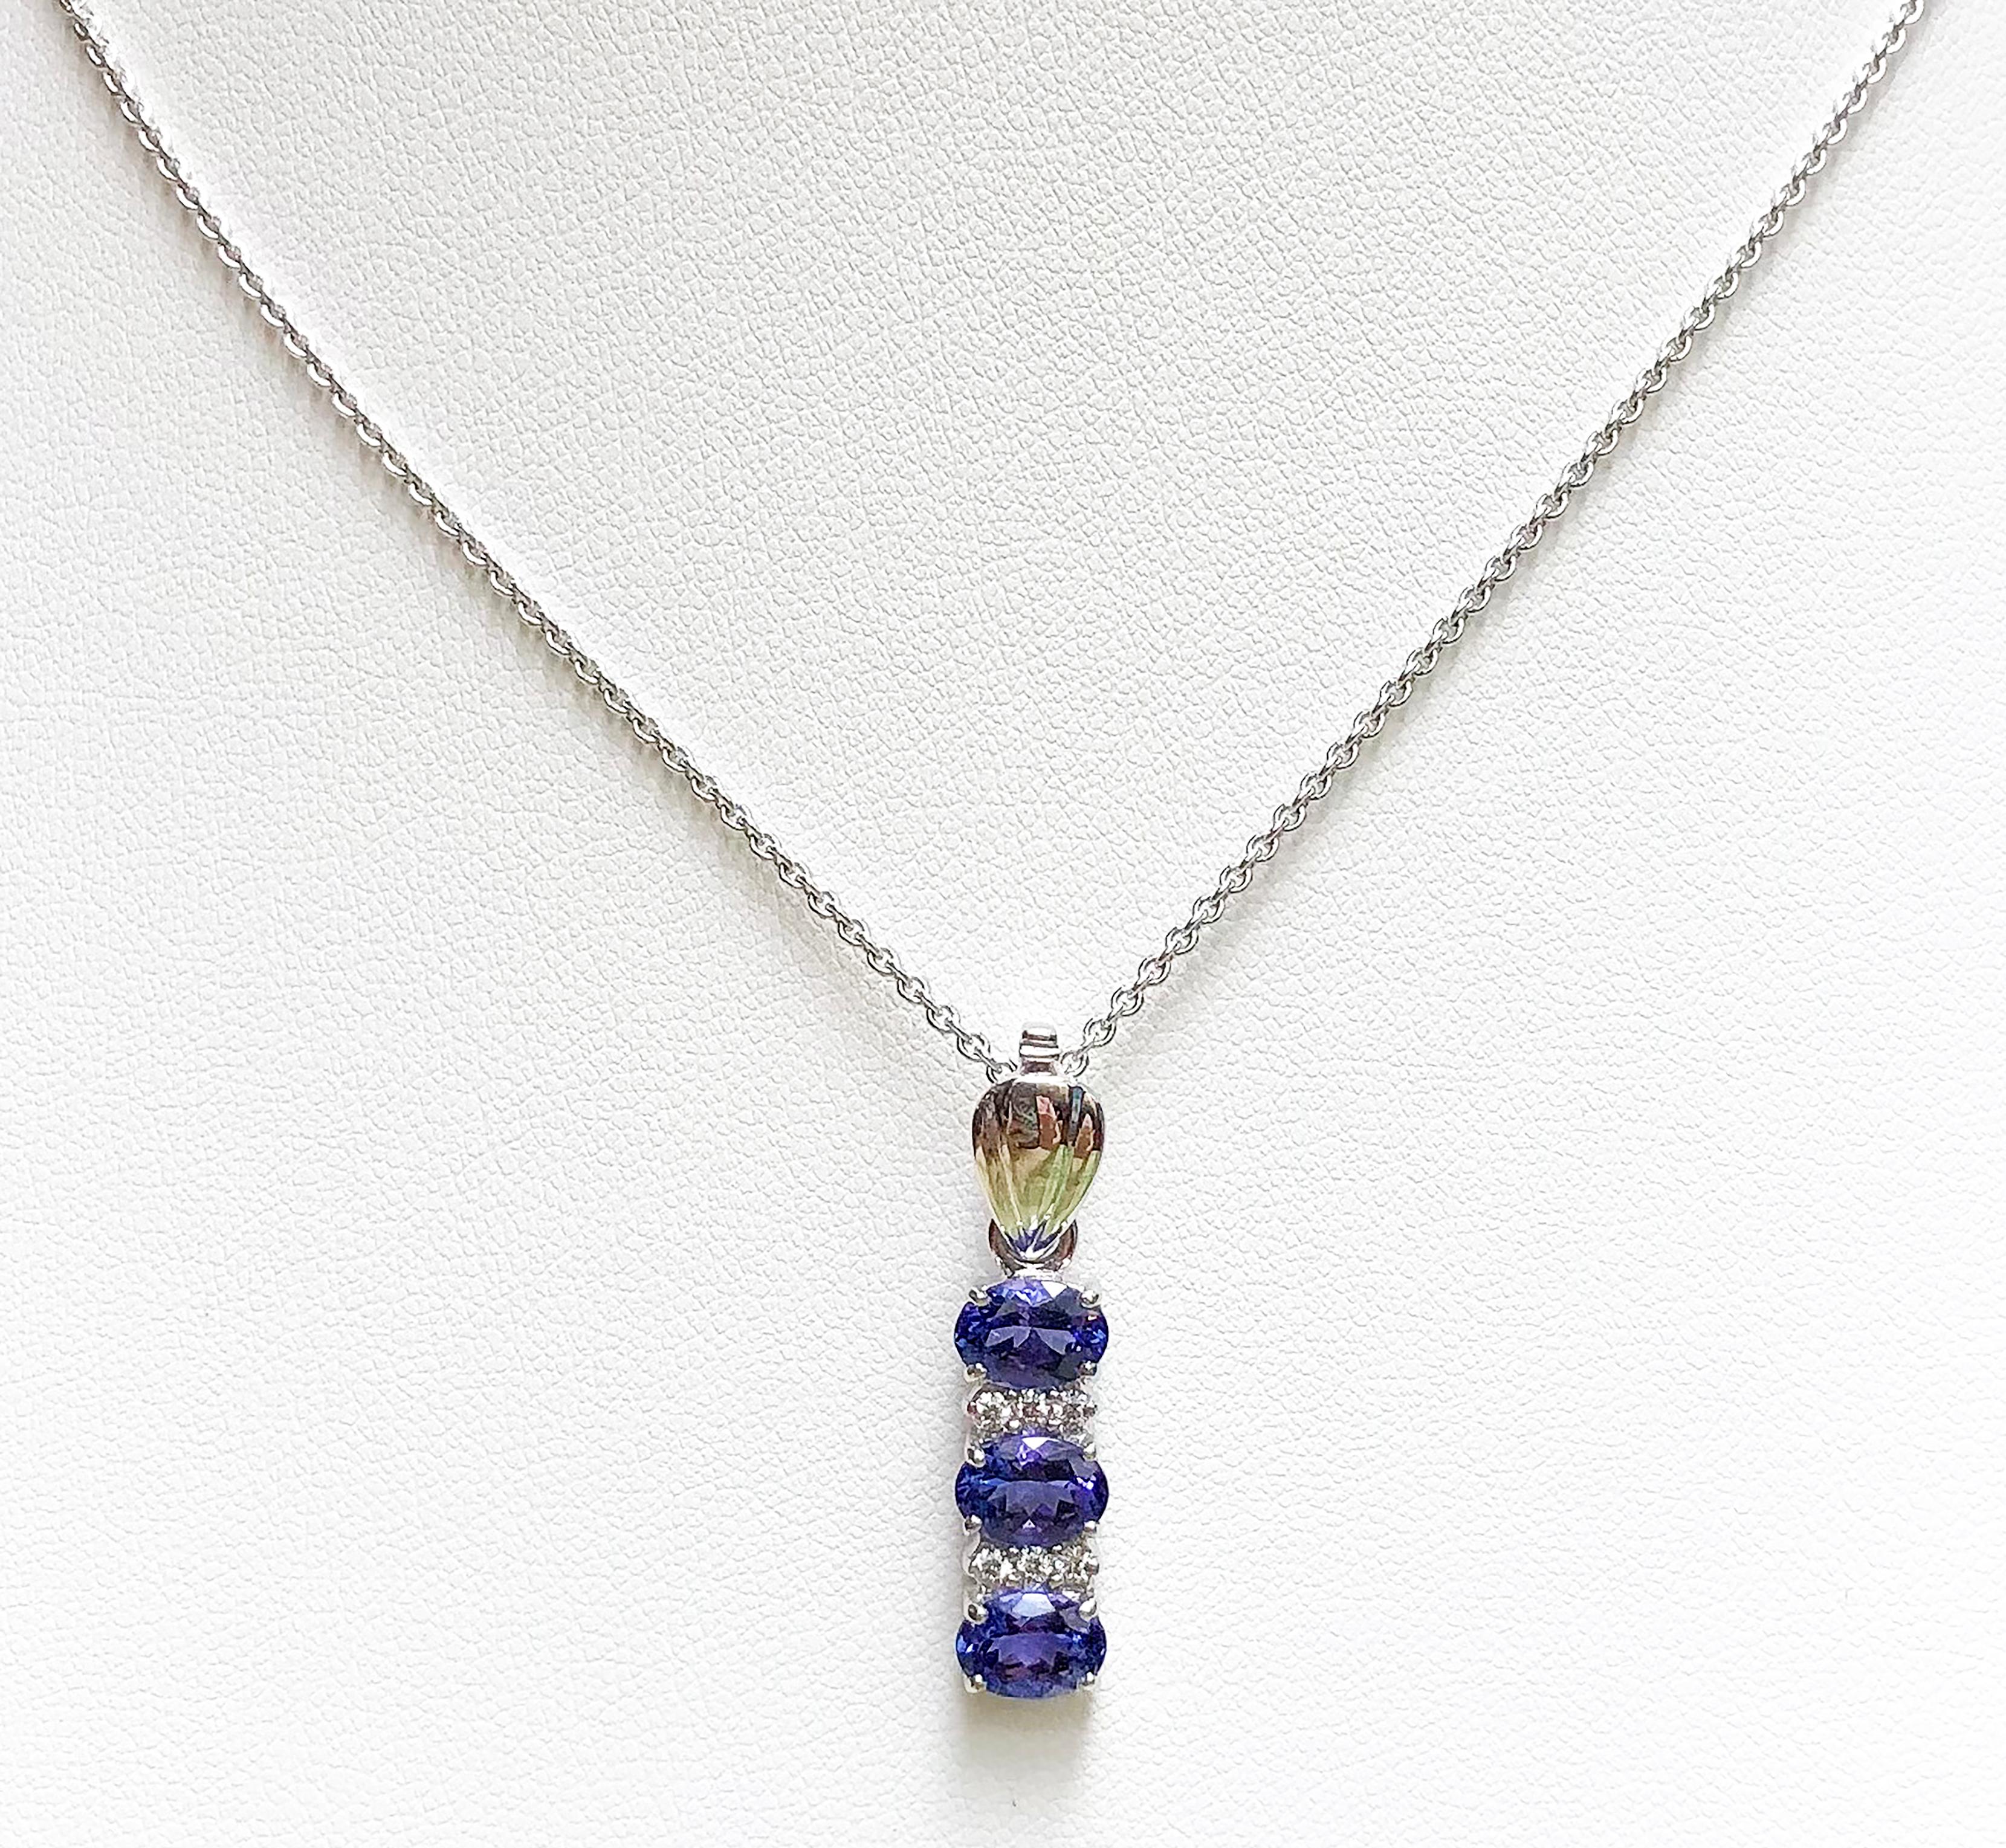 Tanzanite 2.73 carats with Diamond 0.12 carat Pendant set in 18 Karat White Gold Settings
(chain not included)

Width:  0.6 cm 
Length: 3.0 cm
Total Weight: 4.83 grams

